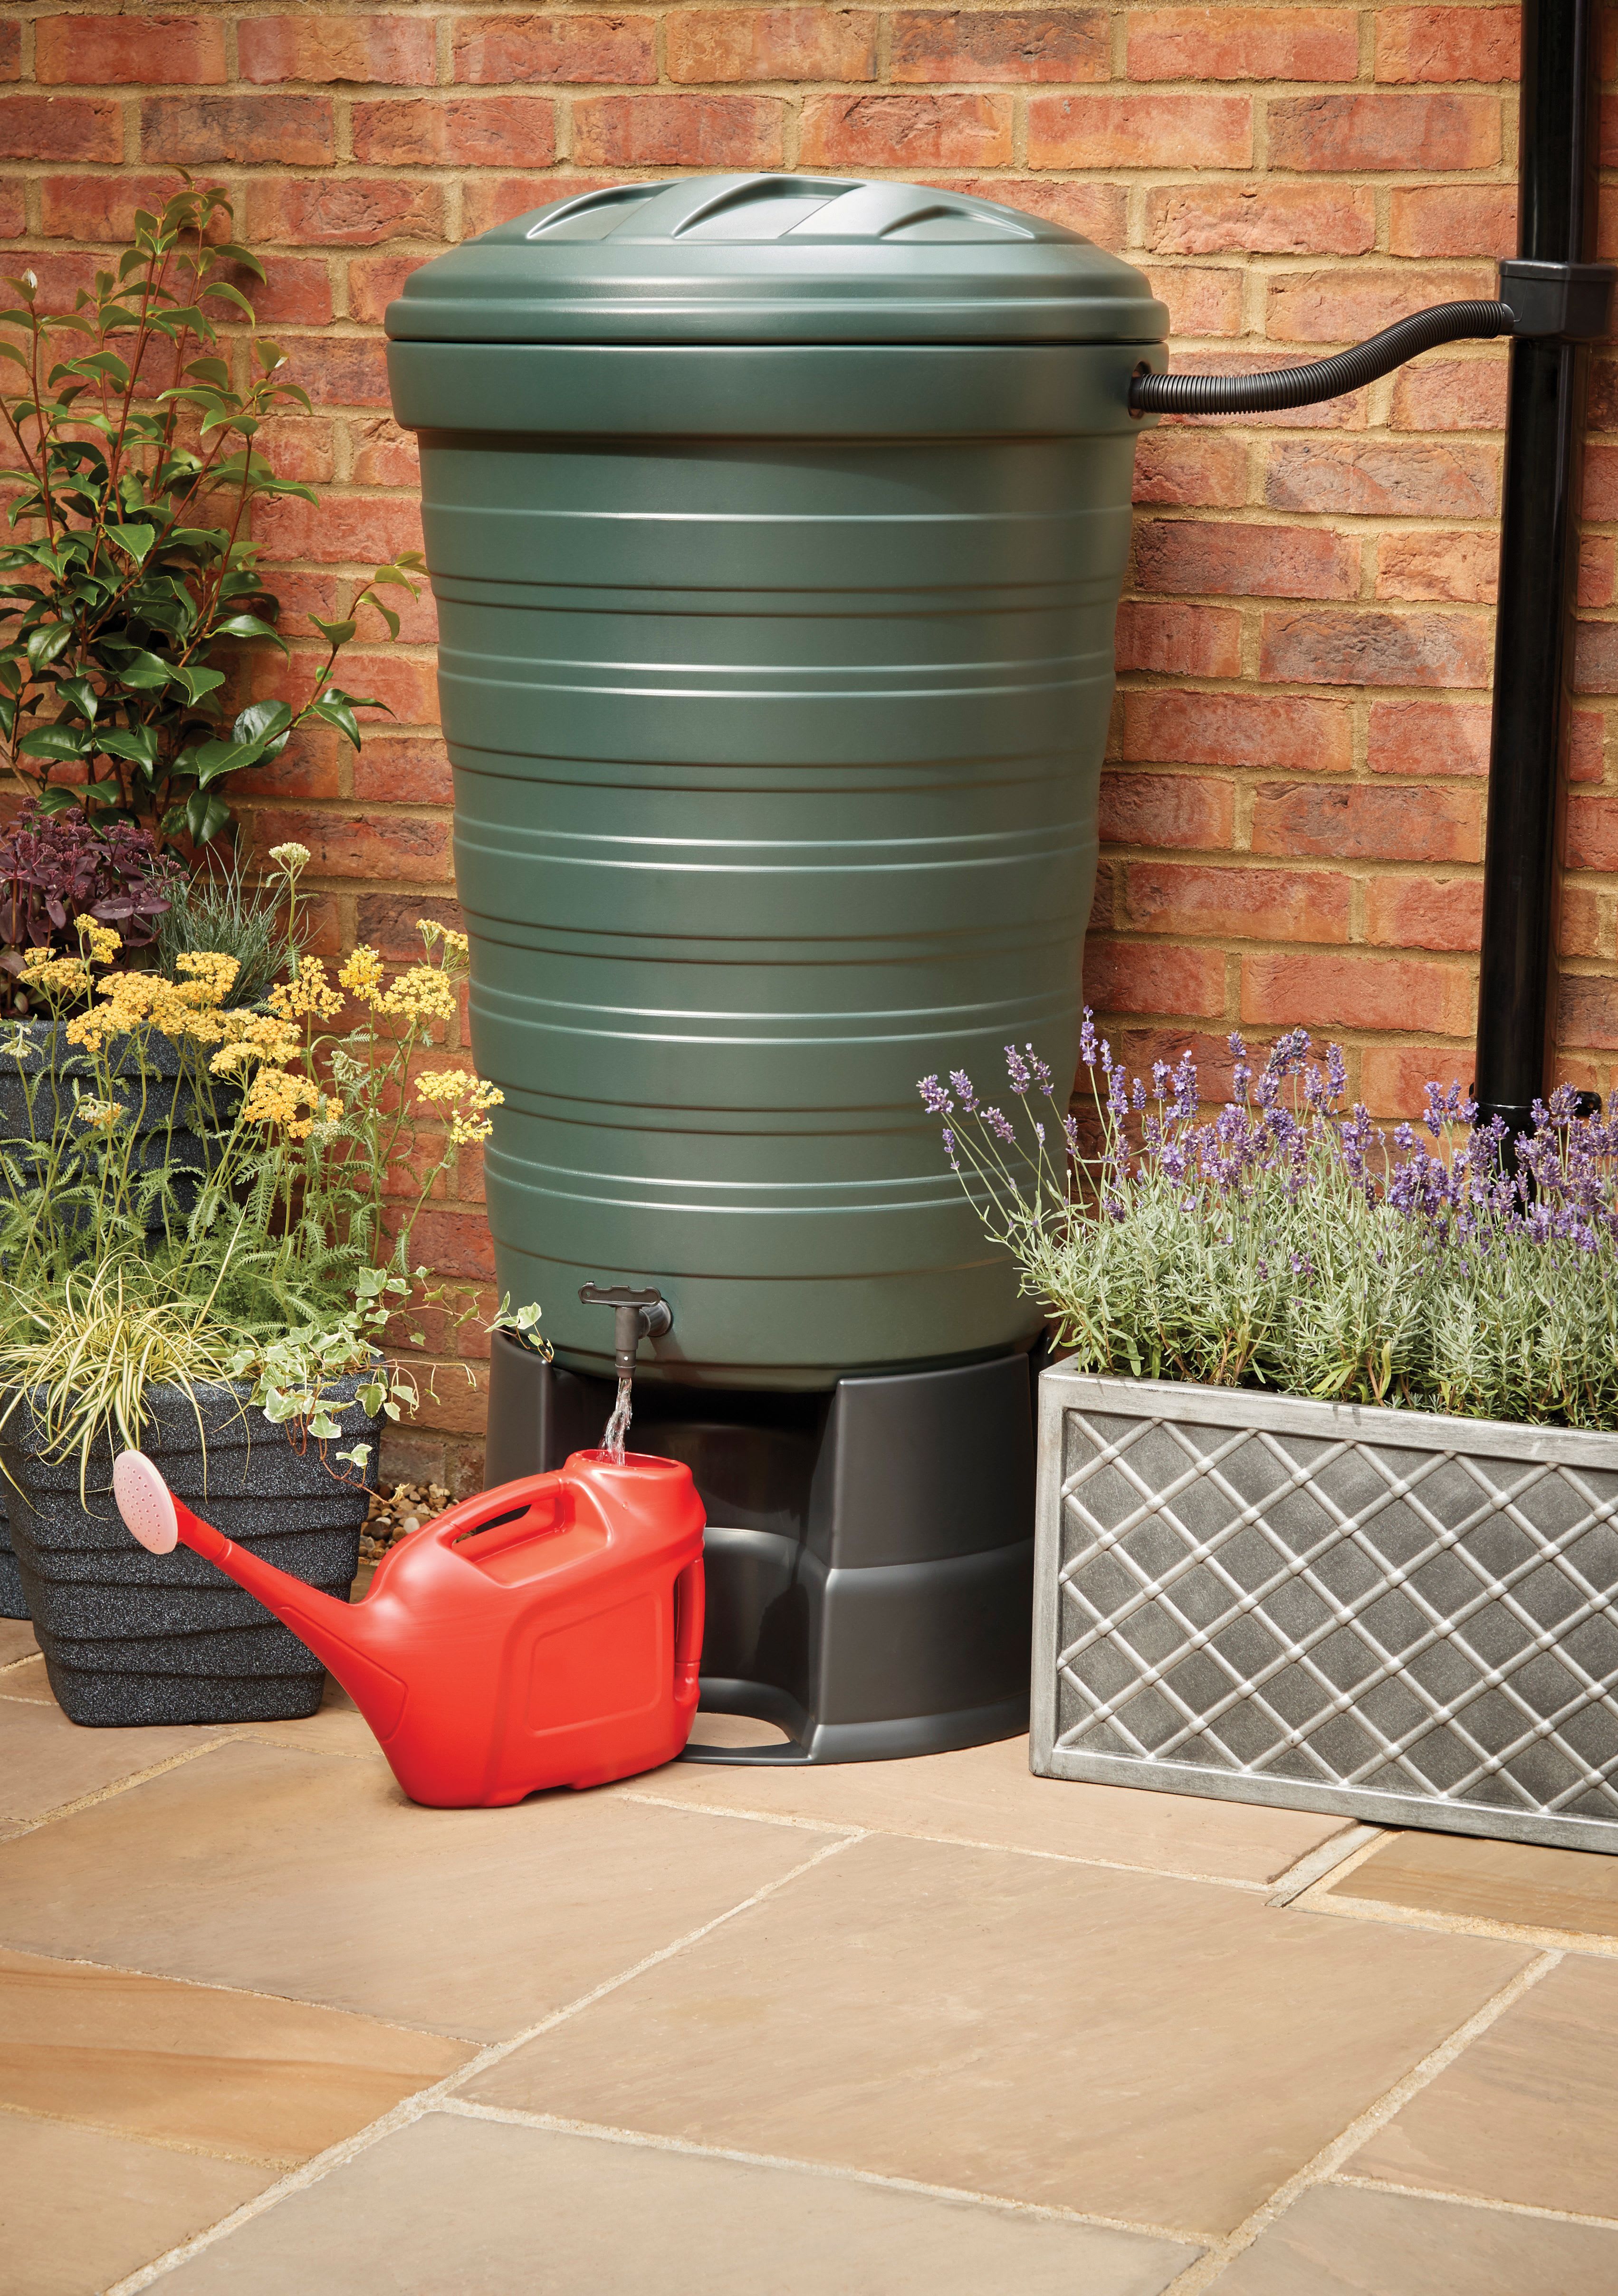 Garden Watering Systems & Irrigation Systems